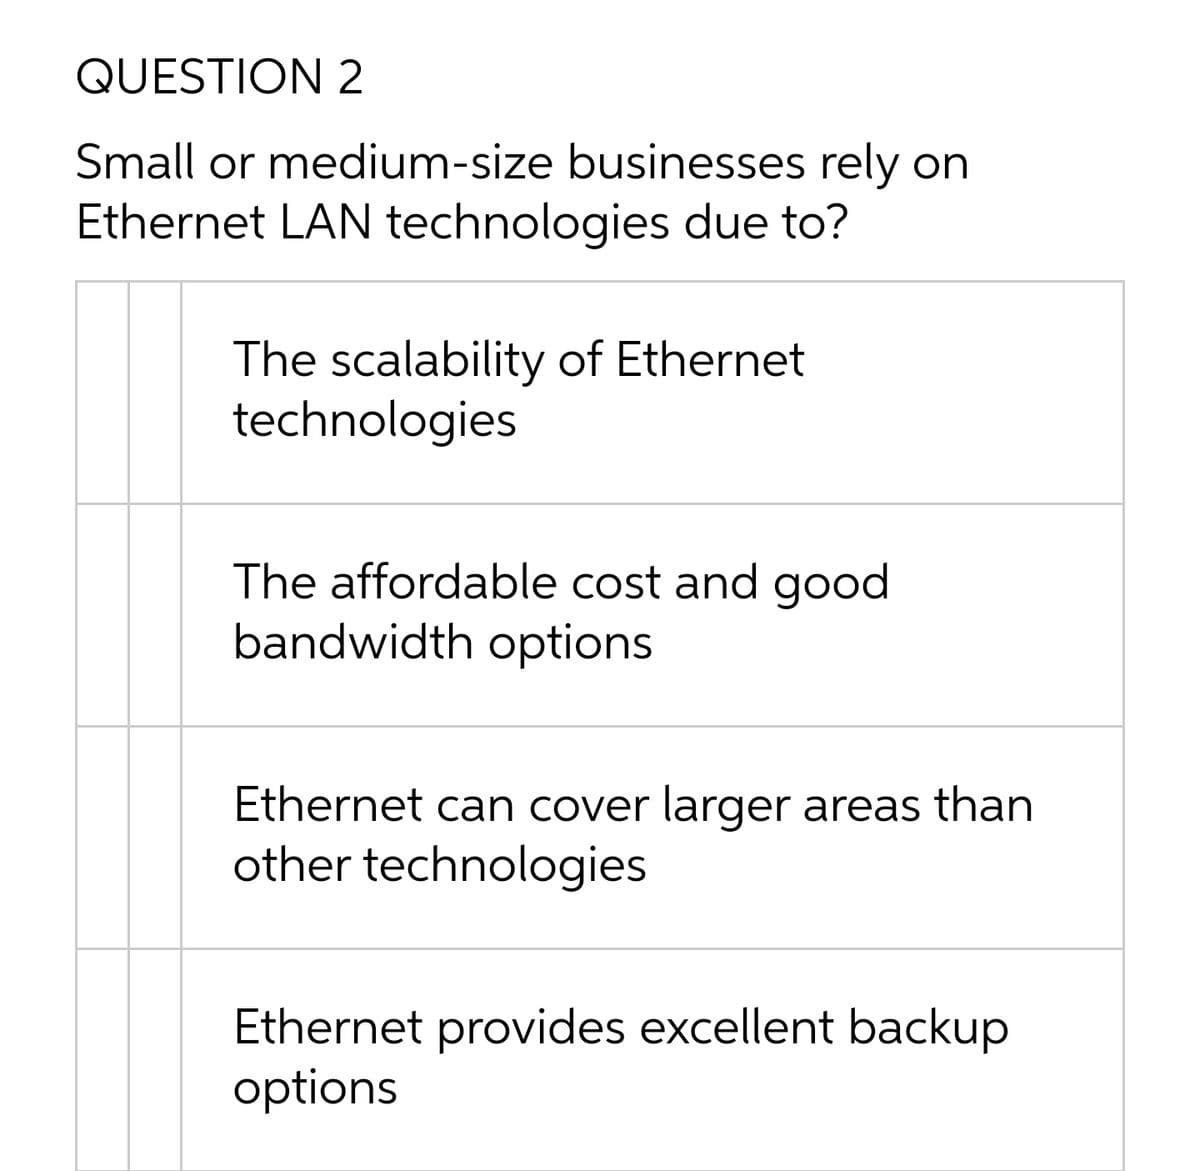 QUESTION 2
Small or medium-size businesses rely on
Ethernet LAN technologies due to?
The scalability of Ethernet
technologies
The affordable cost and good
bandwidth options
Ethernet can cover larger areas than
other technologies
Ethernet provides excellent backup
options
